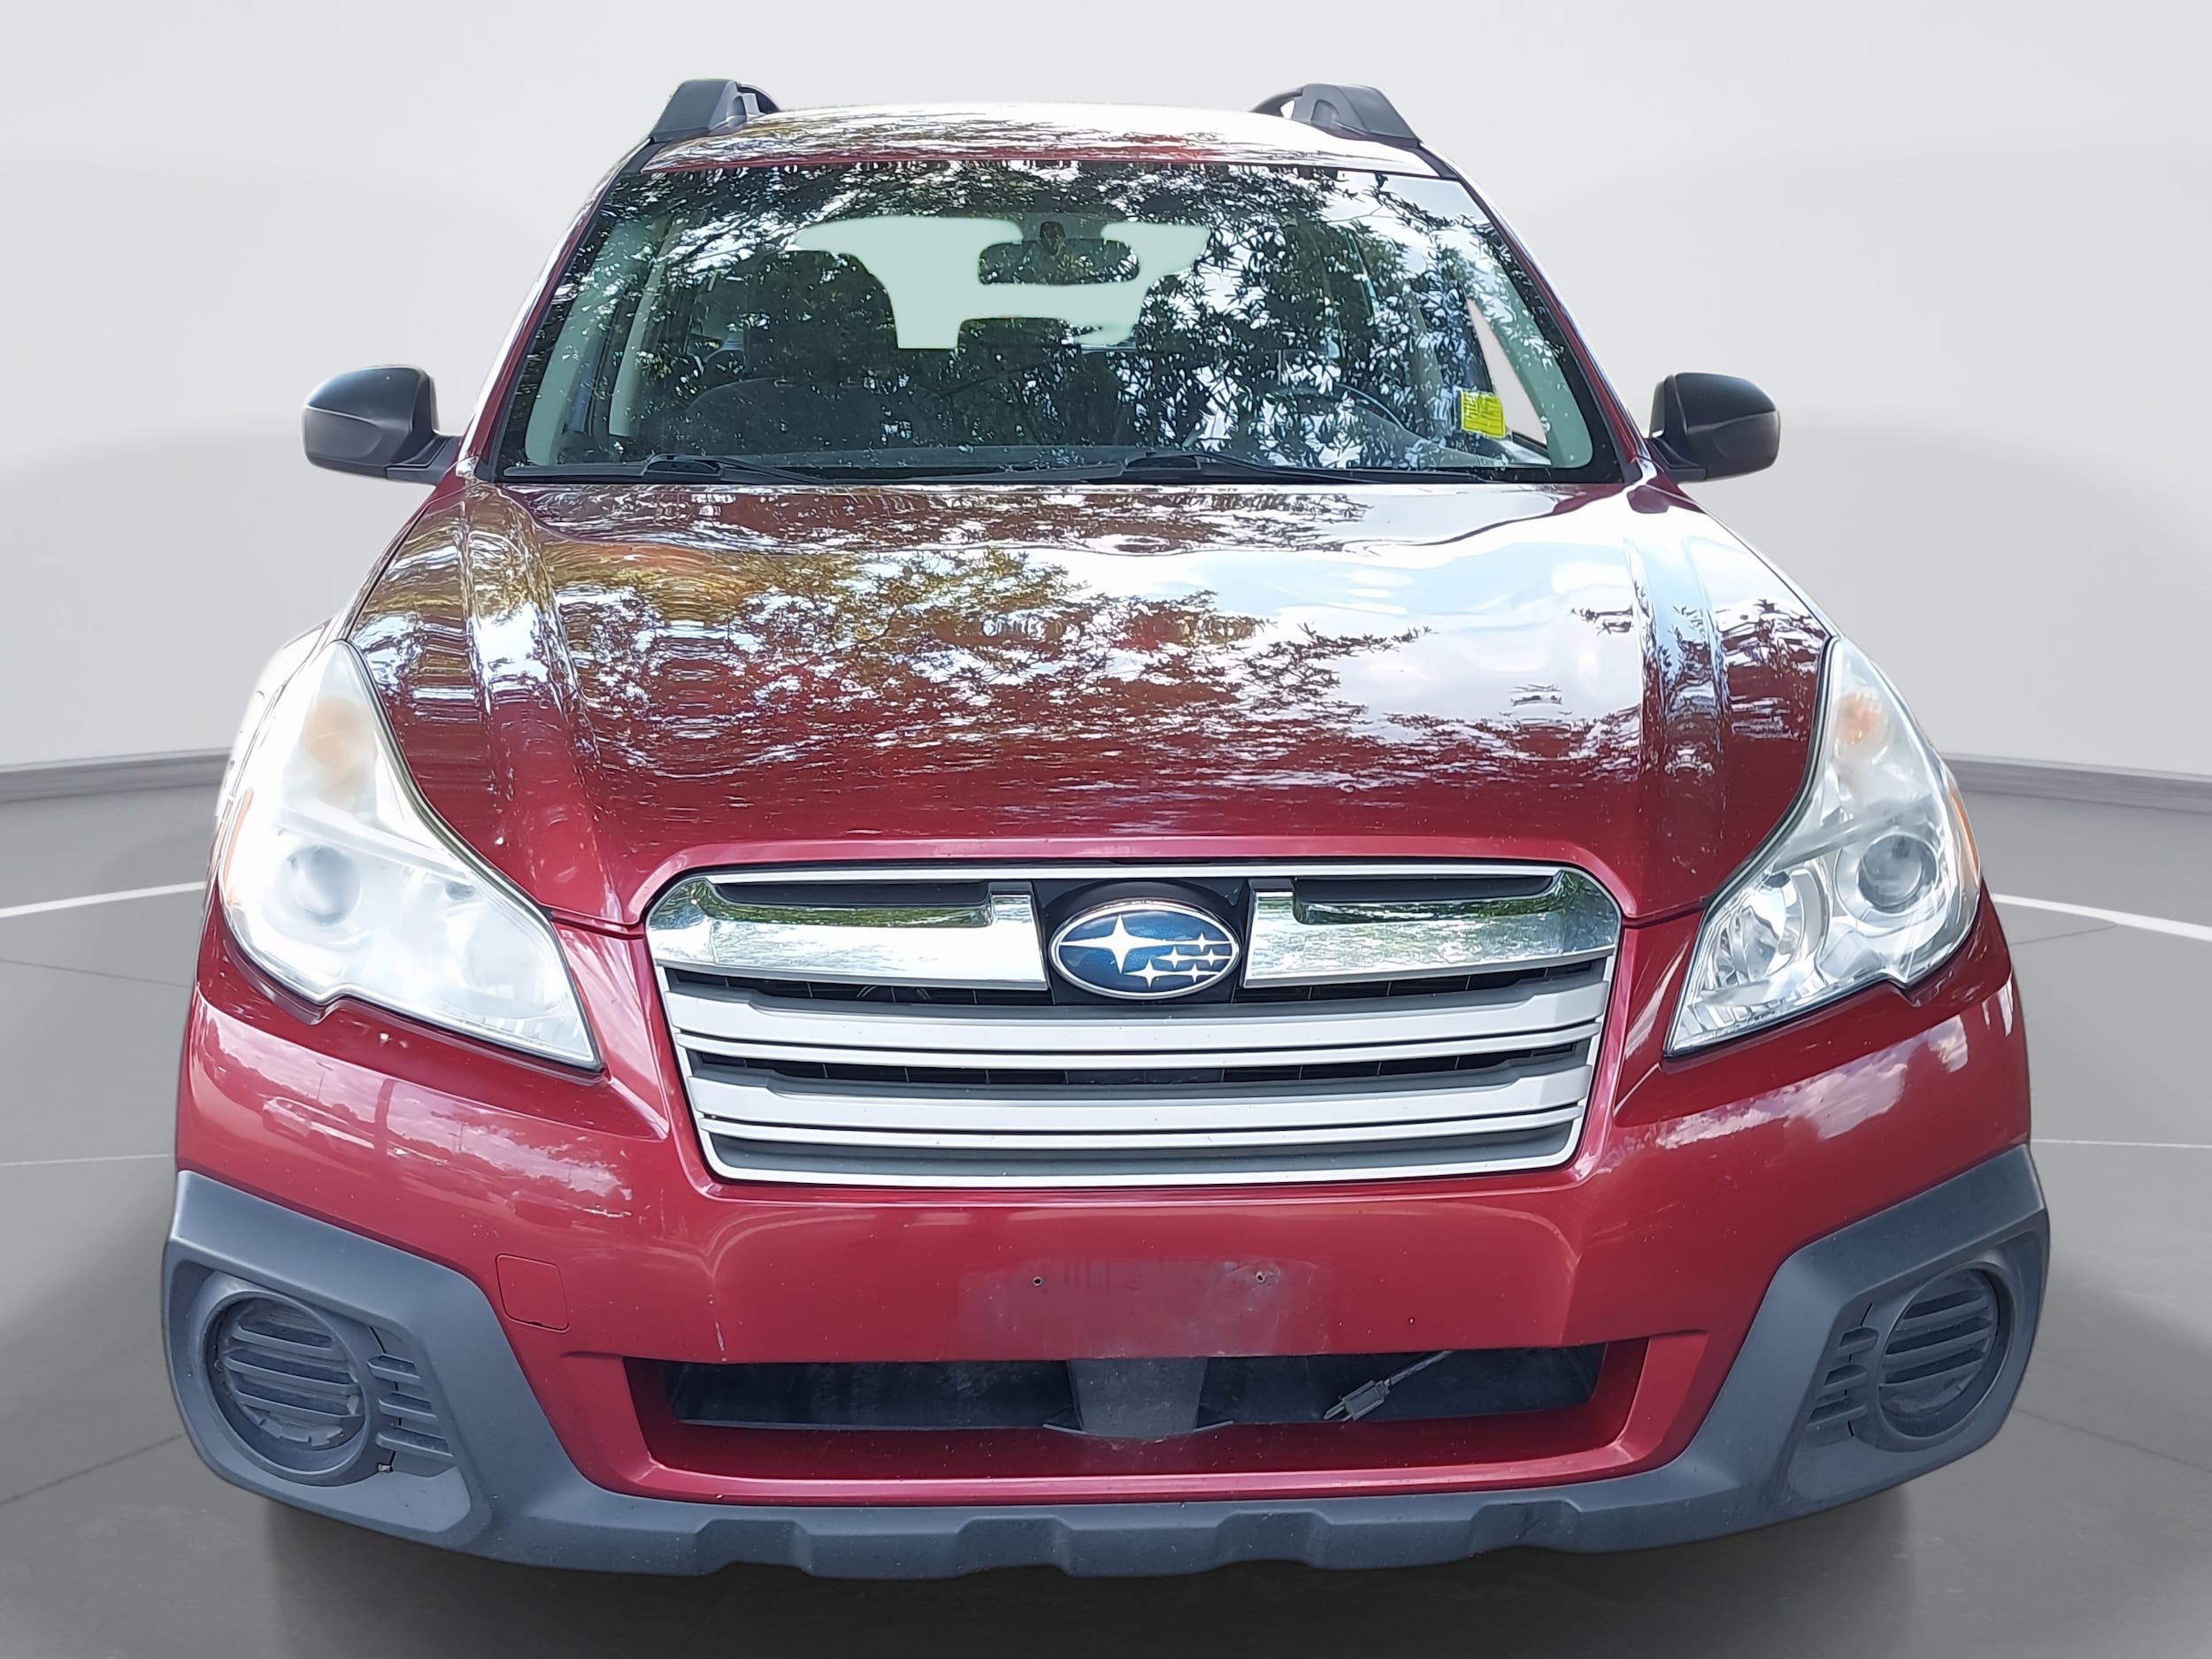 Used 2013 Subaru Outback Base with VIN 4S4BRBACXD3319134 for sale in Knightdale, NC